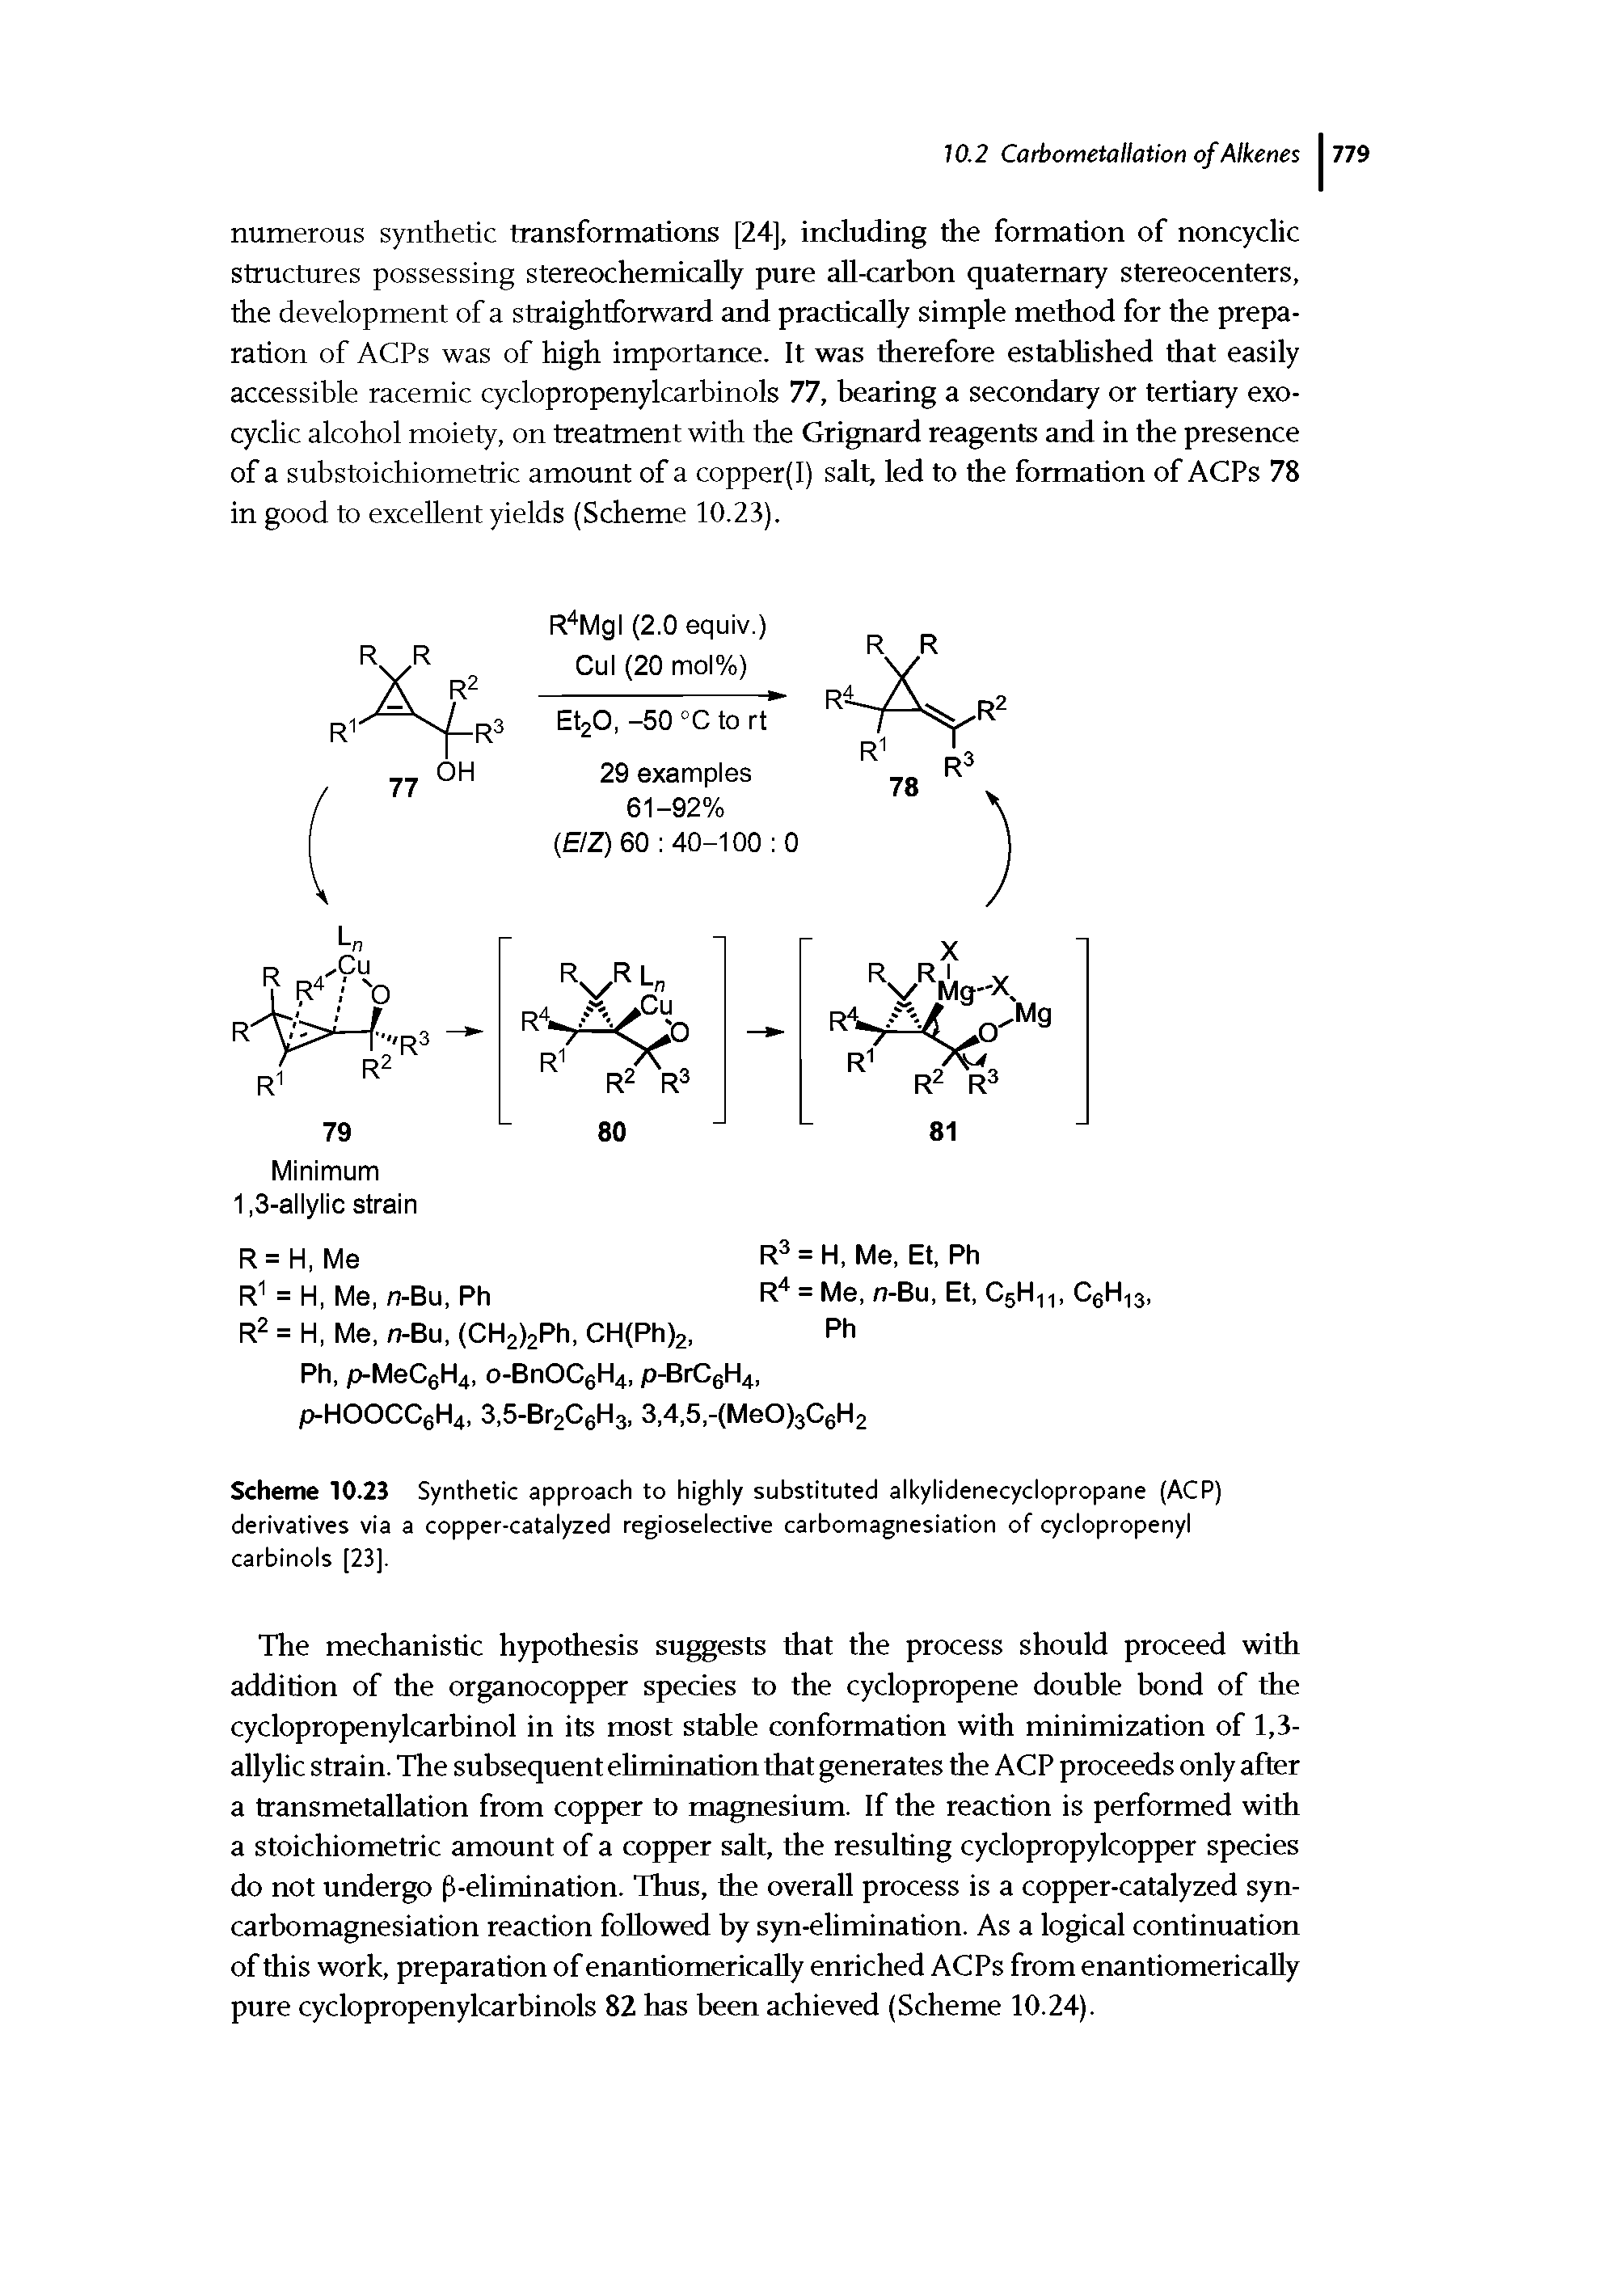 Scheme 10.23 Synthetic approach to highly substituted alkylidenecyclopropane (ACP) derivatives via a copper-catalyzed regioselective carbomagnesiation of cyclopropenyl carbinols [23].